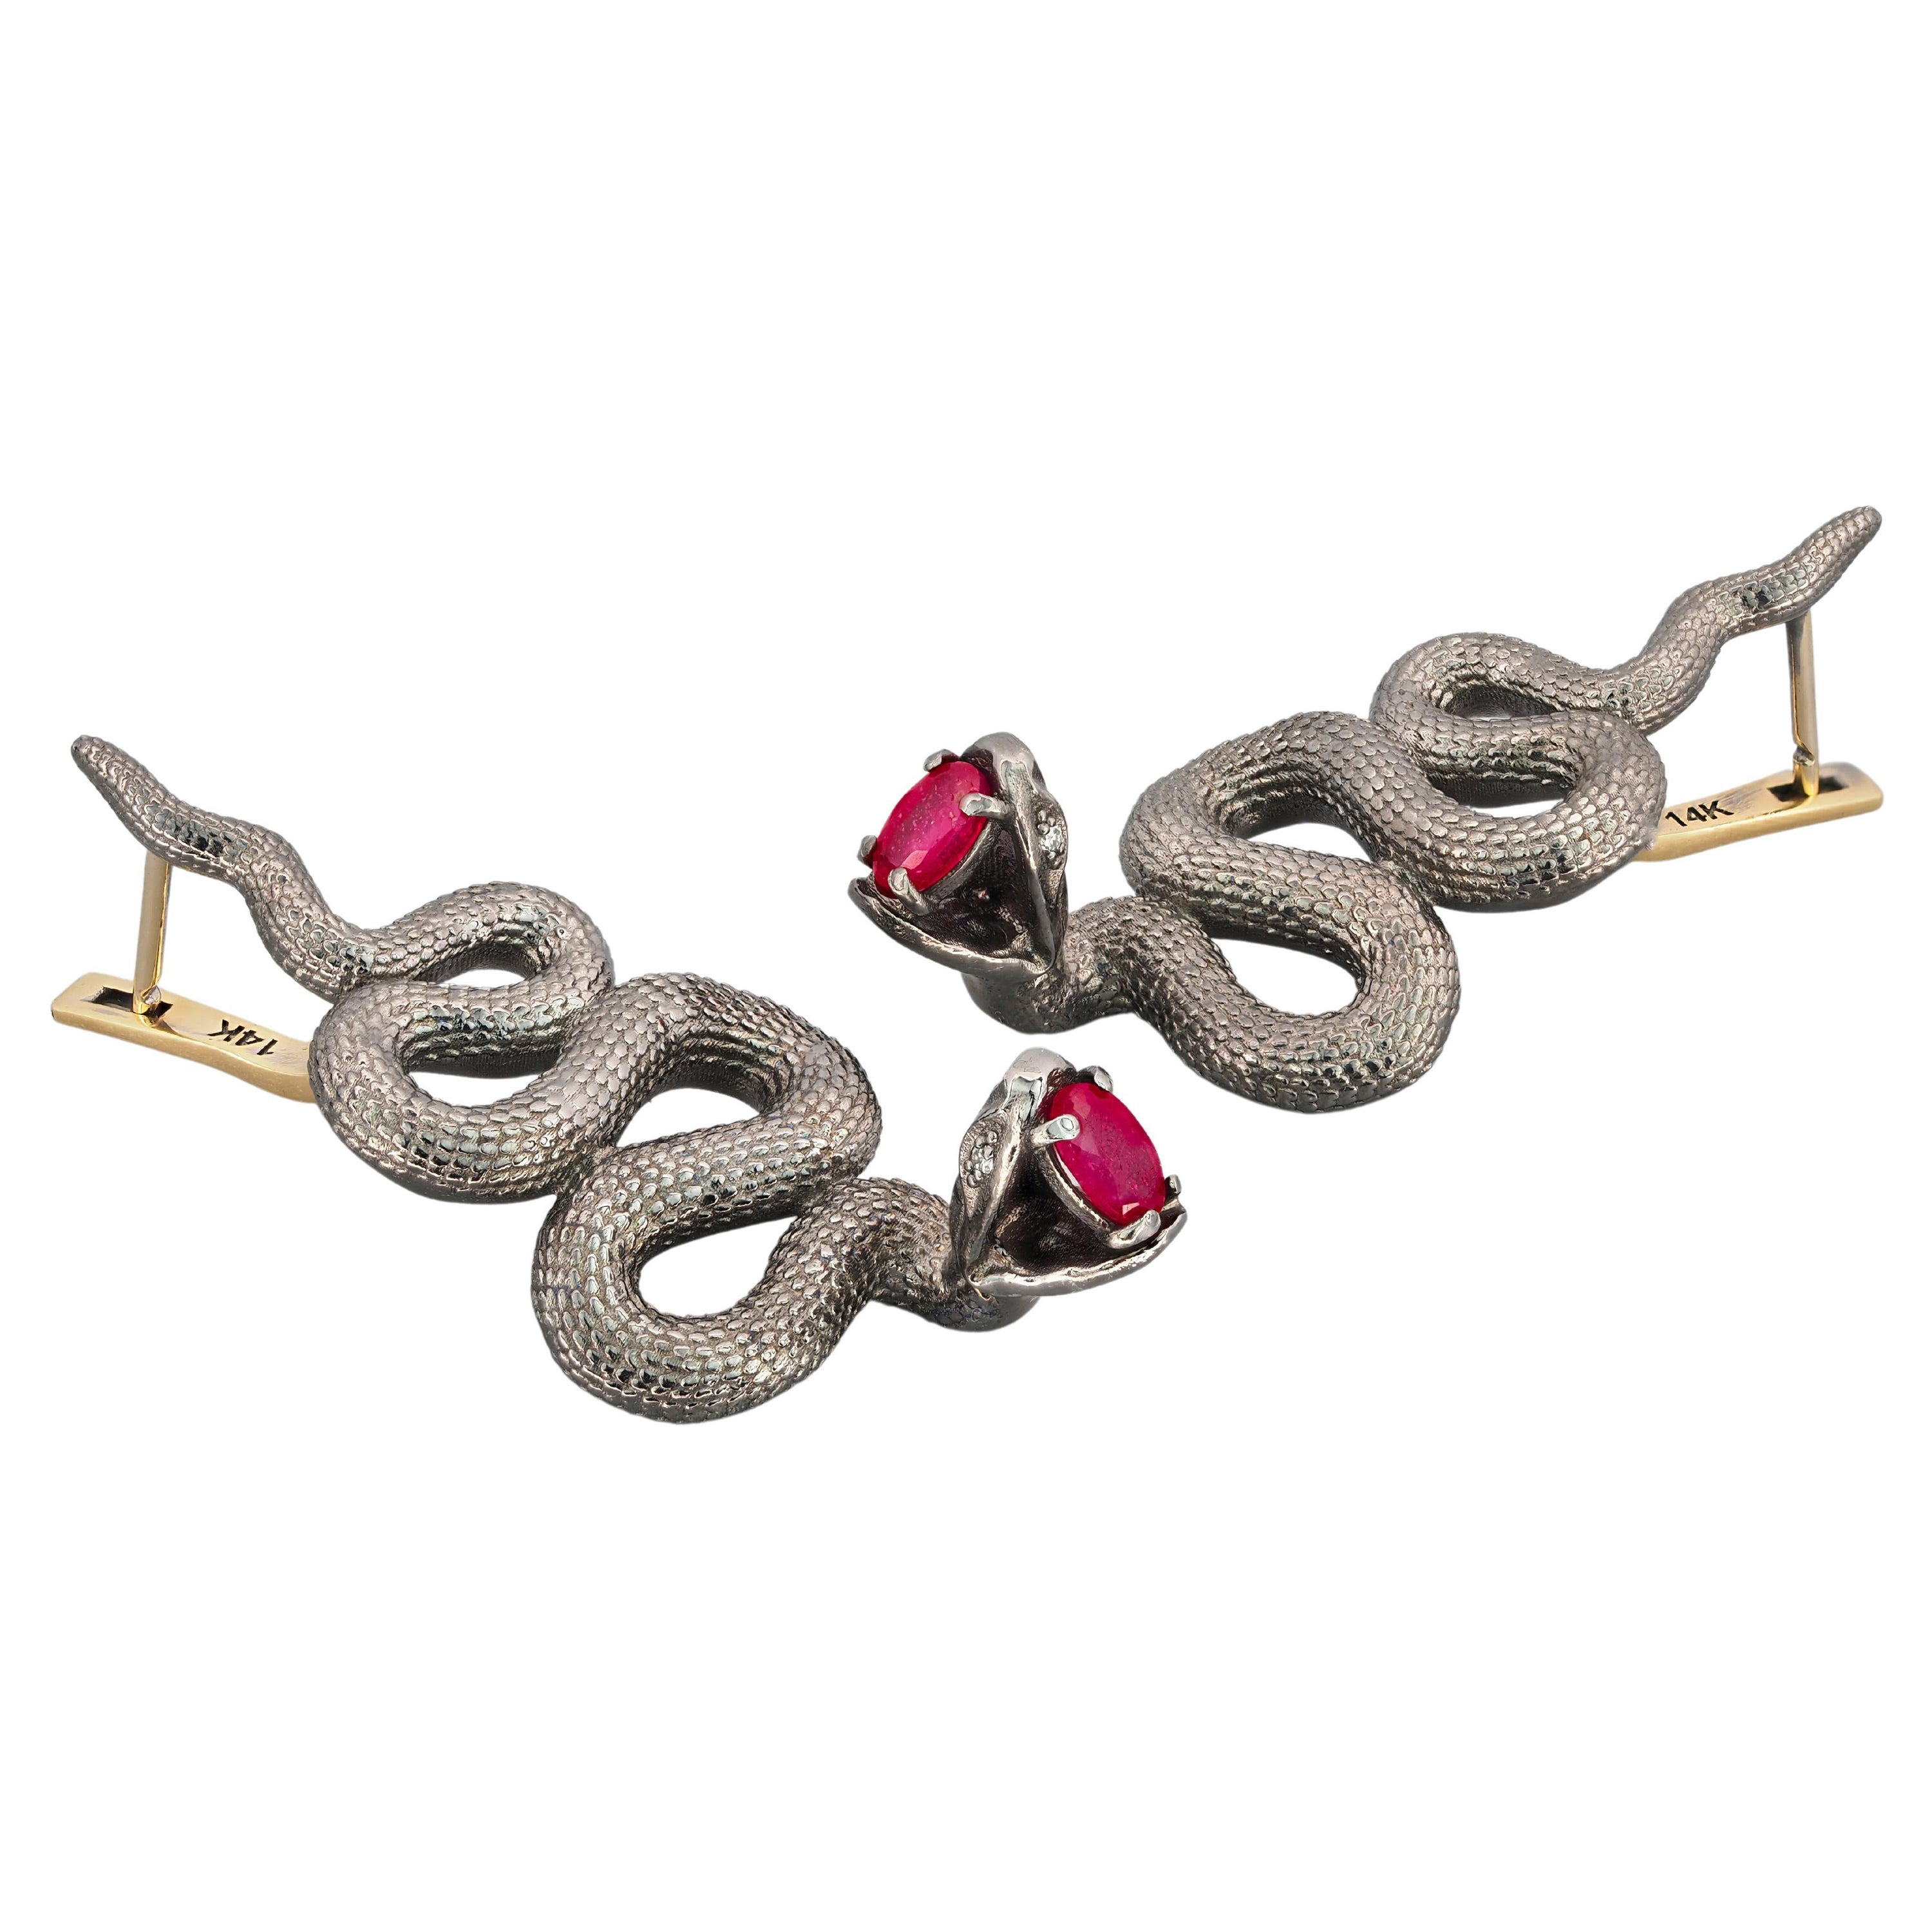 Massive snake earrings with natural rubies in opened mouth and diamonds in eyes. July birthstone.

Earrings are made with two material: 
14 kt solid yellow gold - clasp.
925 purity silver - other parts.
Gold: 1.5 g.
Silver: 12 g.
Total weight: 13.5